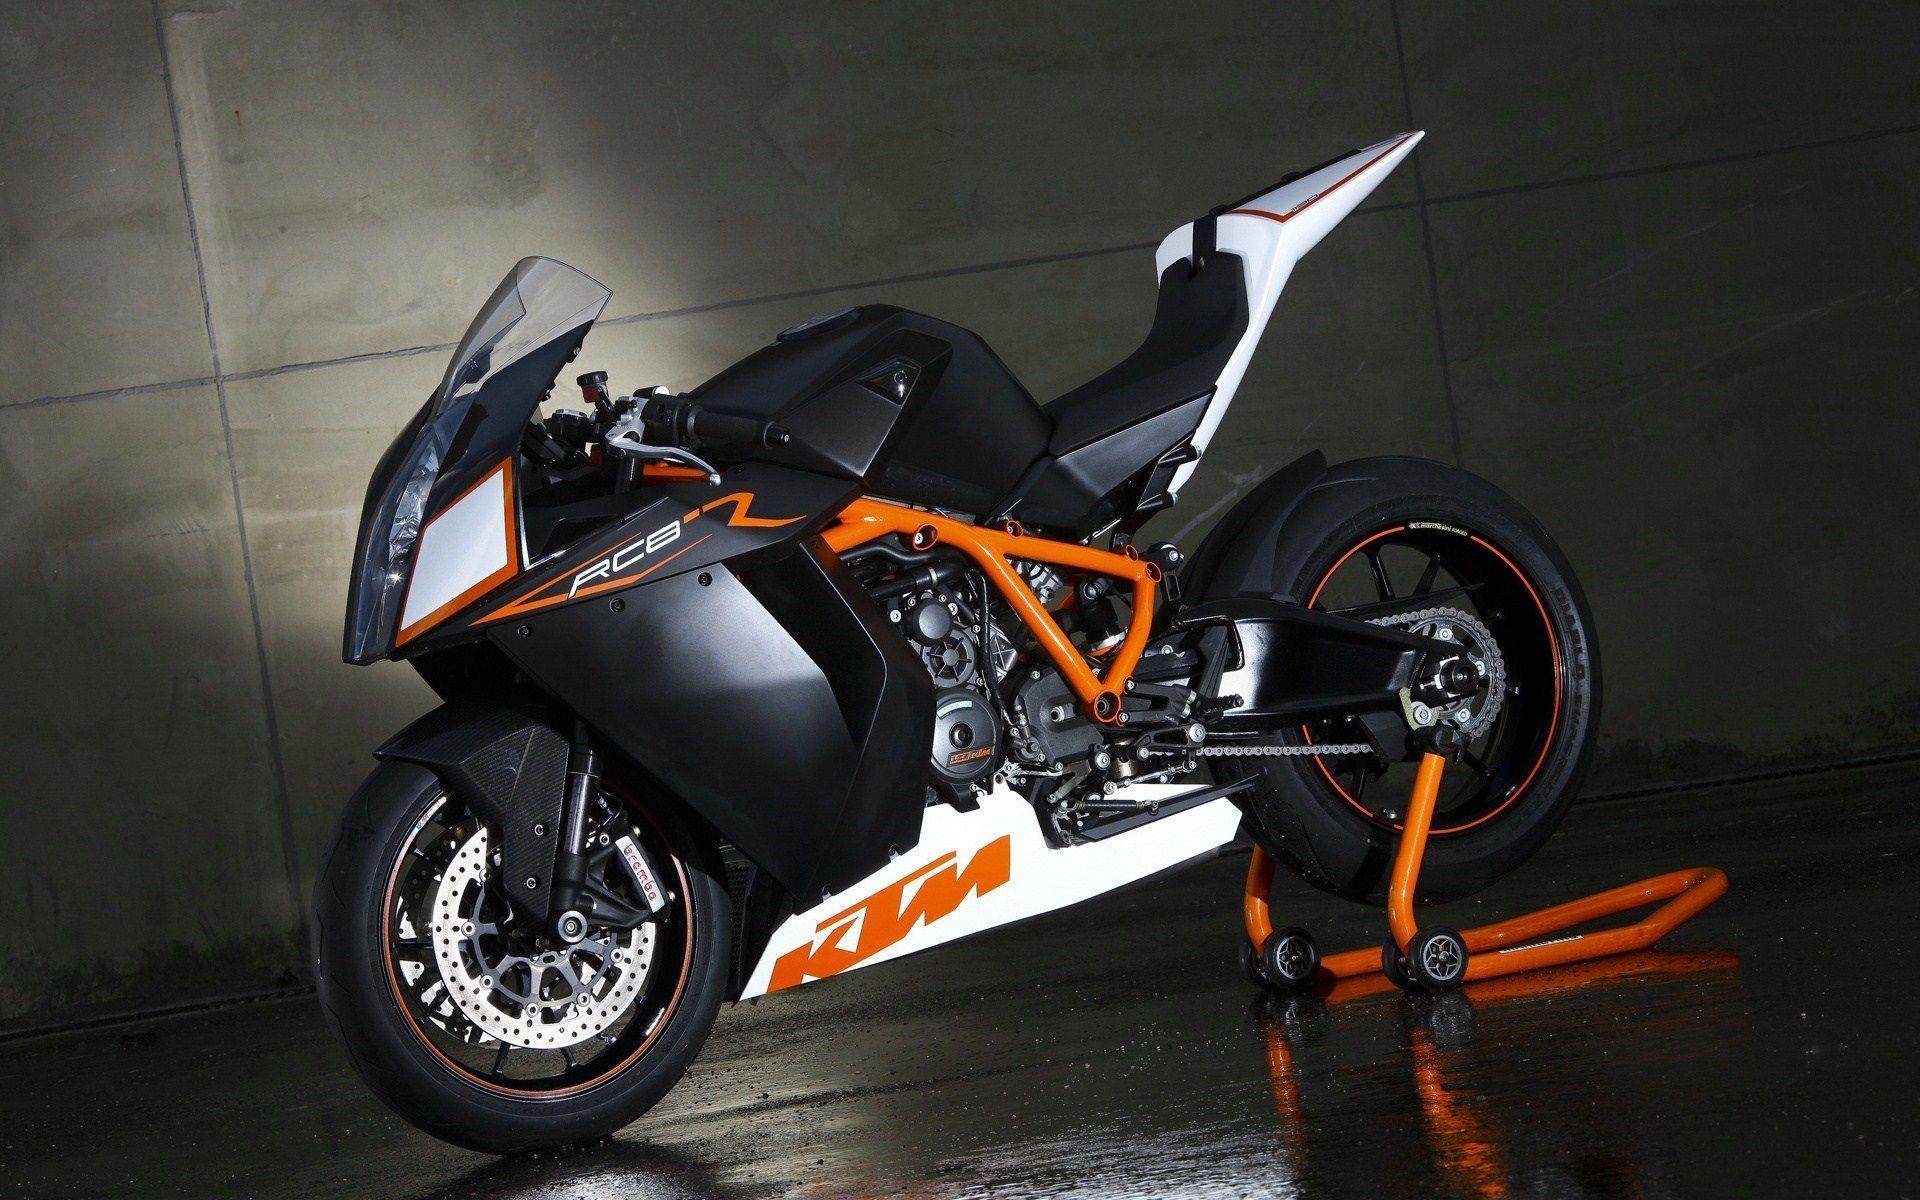 Ktm 1190 Rc8 Motorcycle Concrete Wall Hd Wallpaper Background Uhd